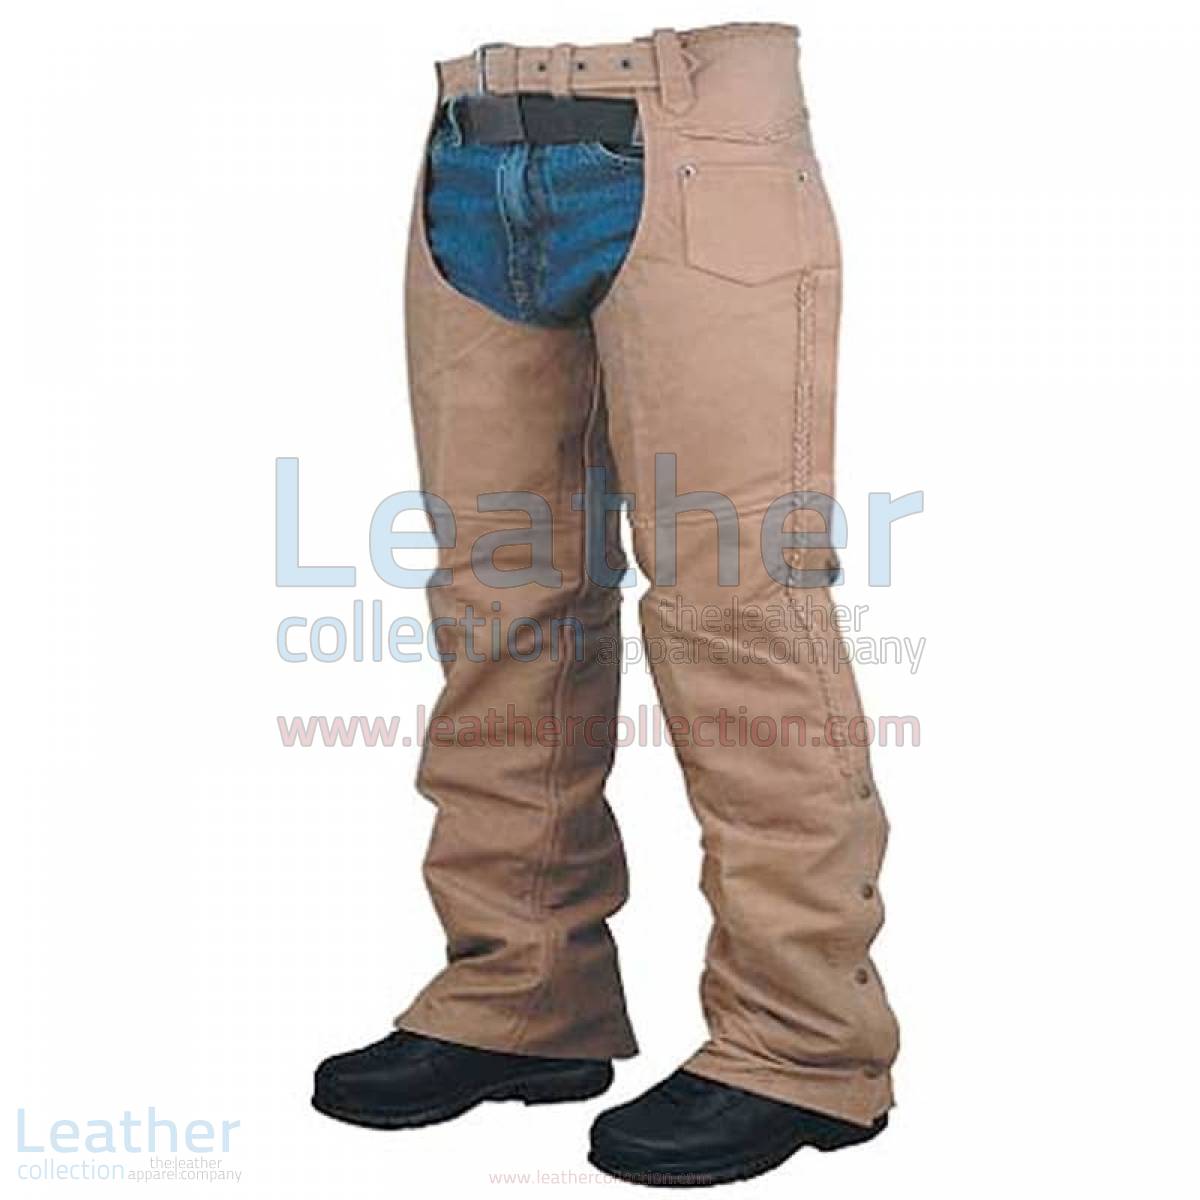 Leather Braided Chaps For Men